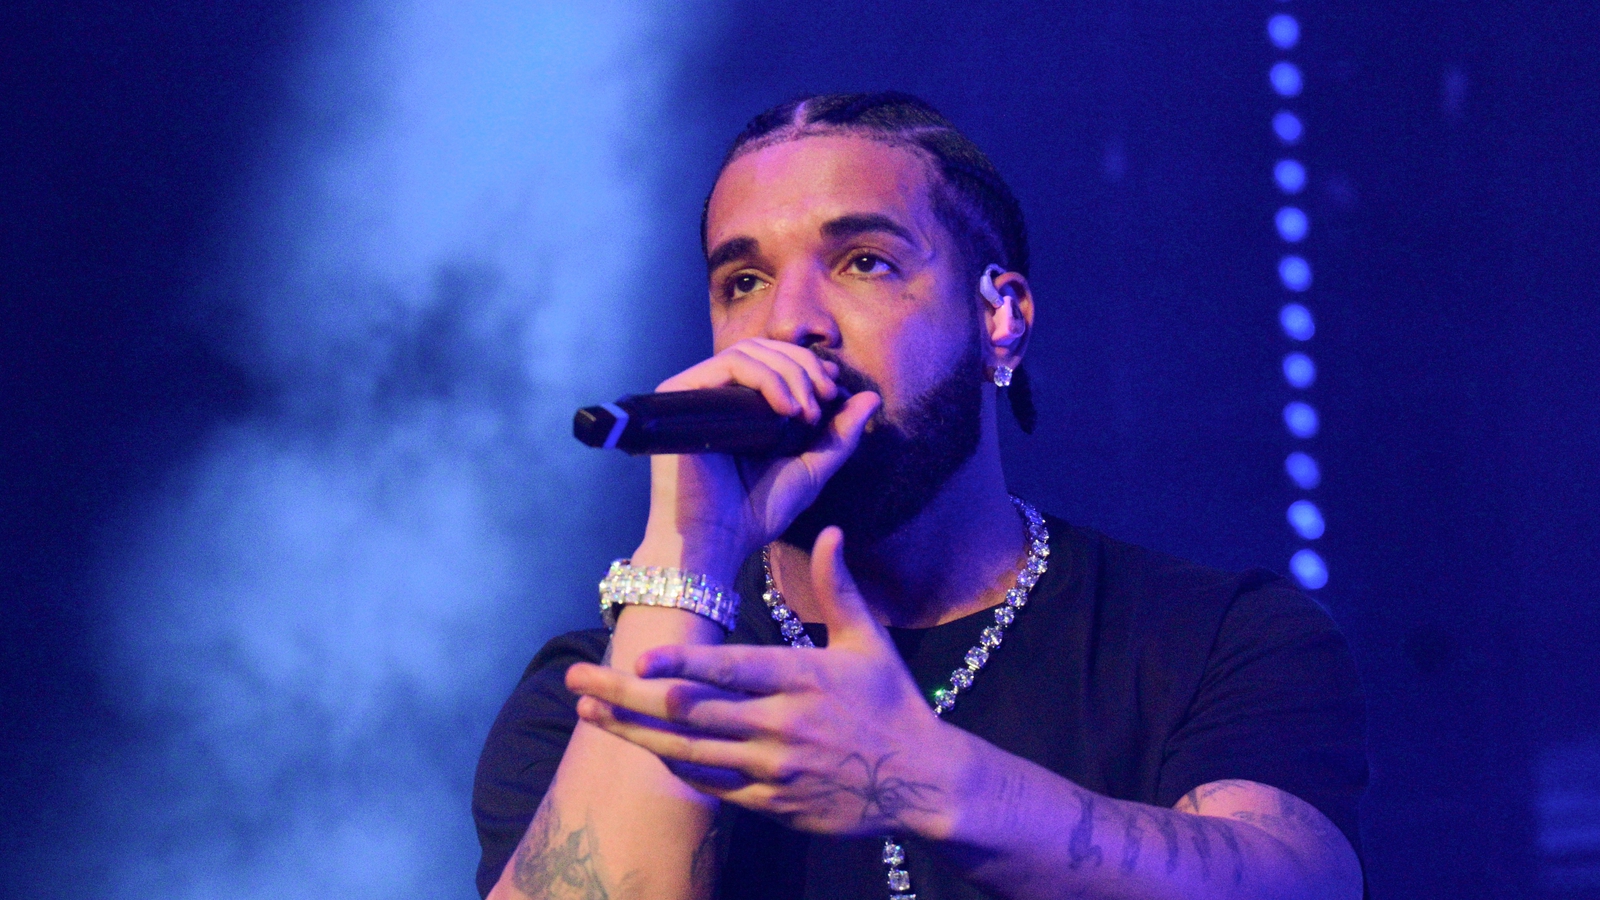 AI song imitating Drake removed from streaming services